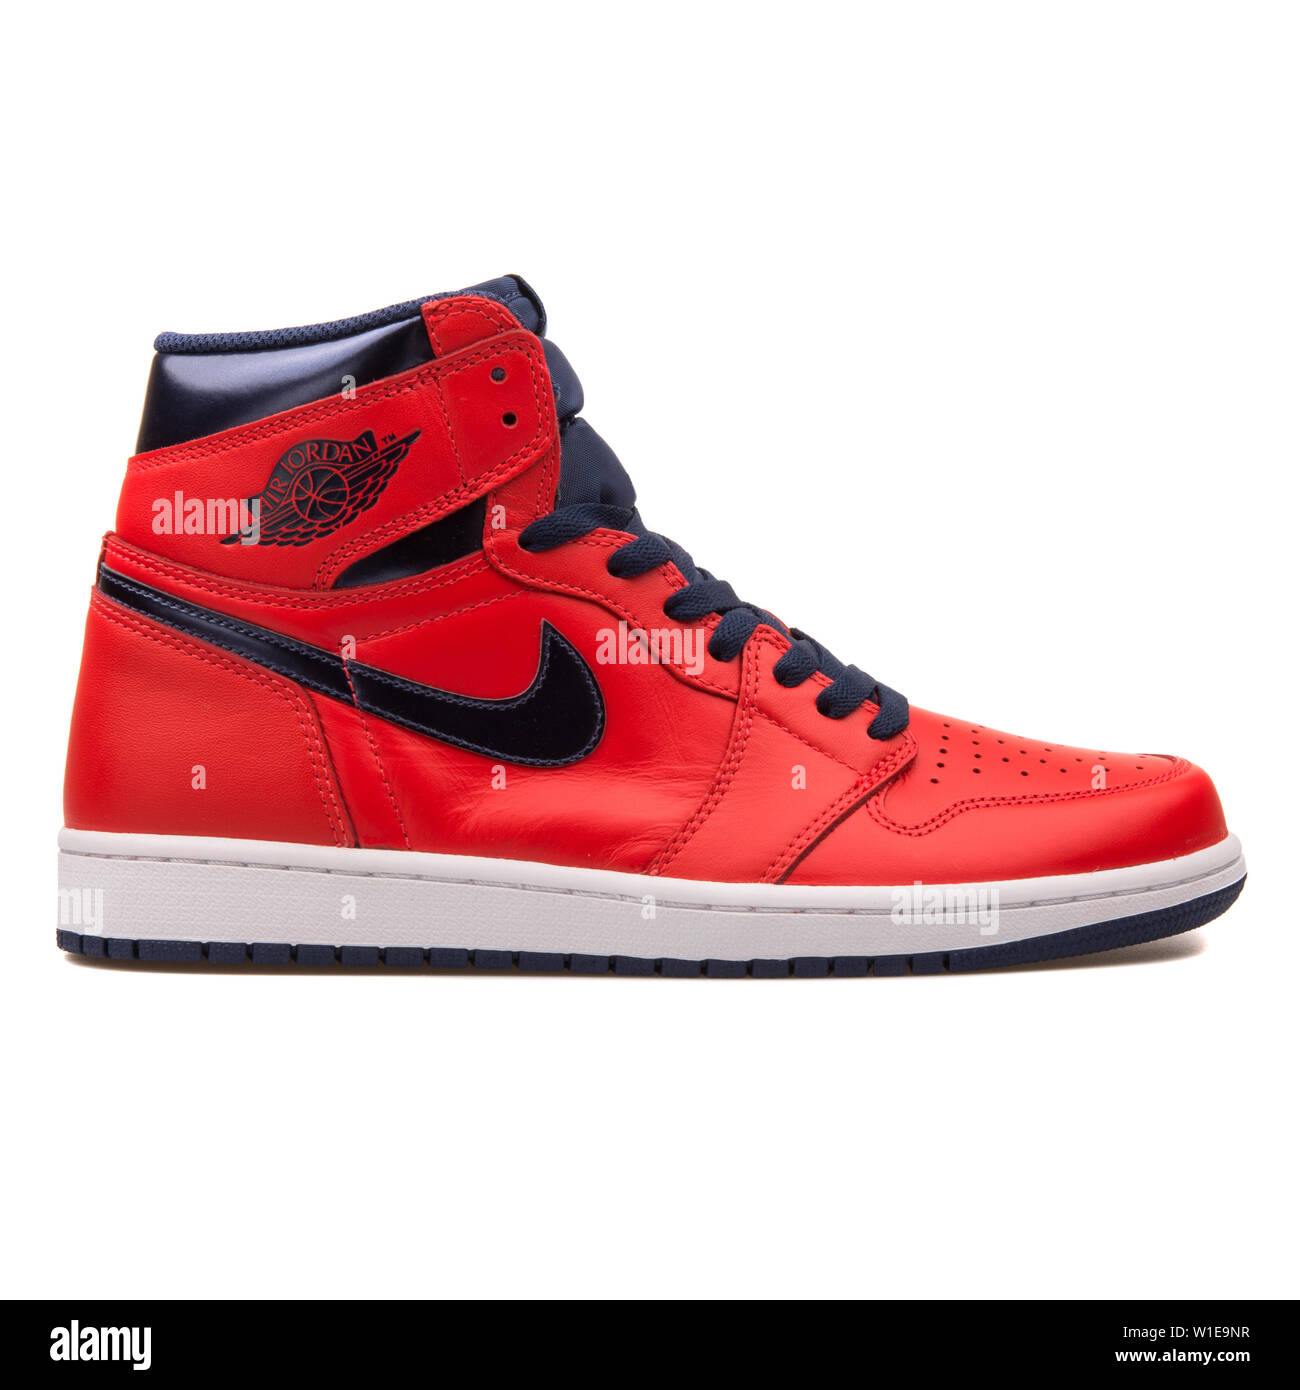 VIENNA, AUSTRIA - JUNE 14, 2017: Nike Air Jordan 1 Retro High OG red and  black sneaker isolated on grey background Stock Photo - Alamy